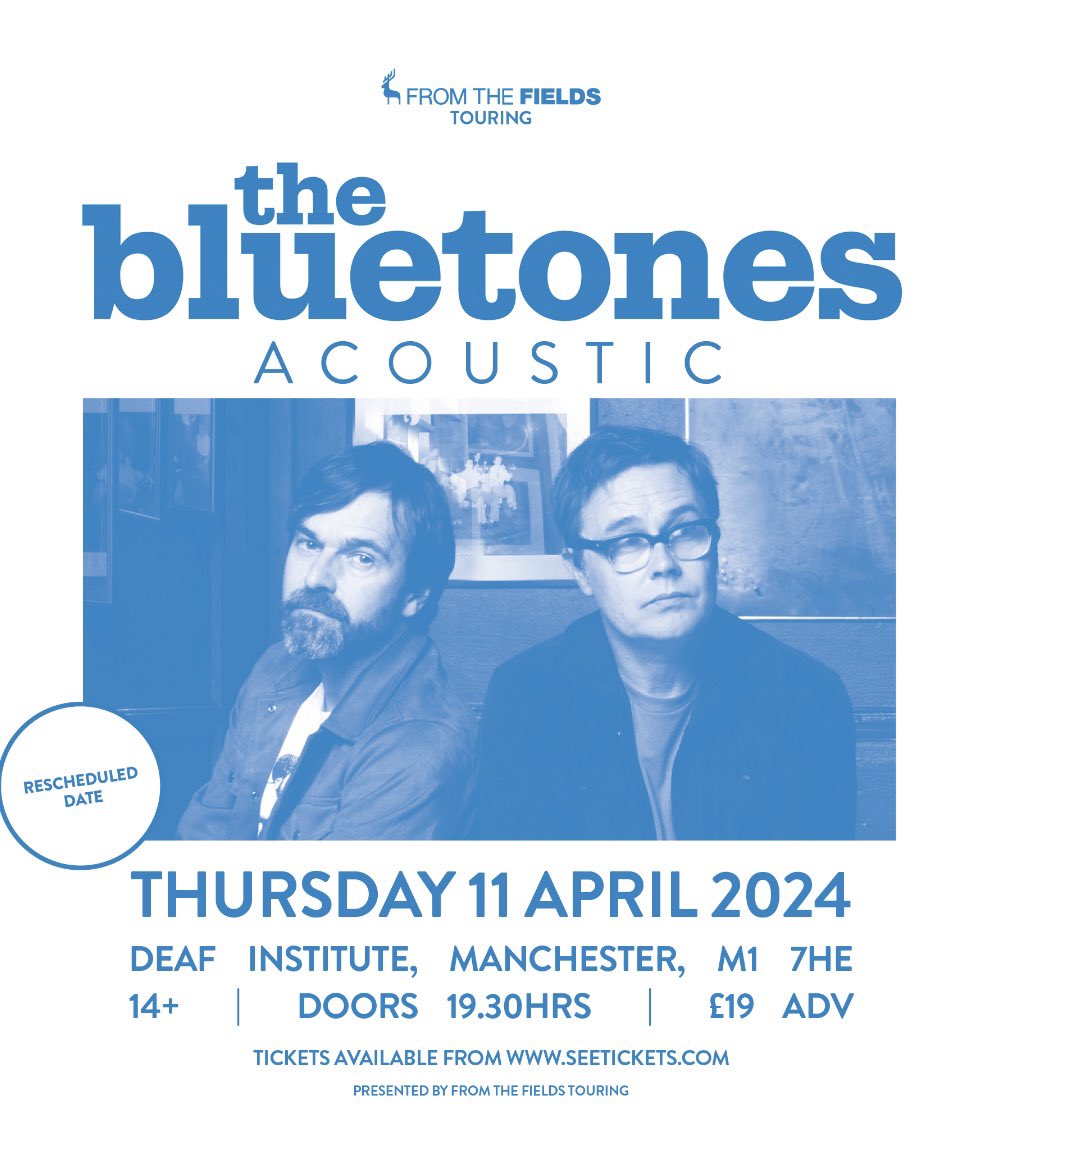 Fewer than 10 tickets remaining for our acoustic show @DeafInstitute in Manchester on April 11th. seetickets.com/event/the-blue…